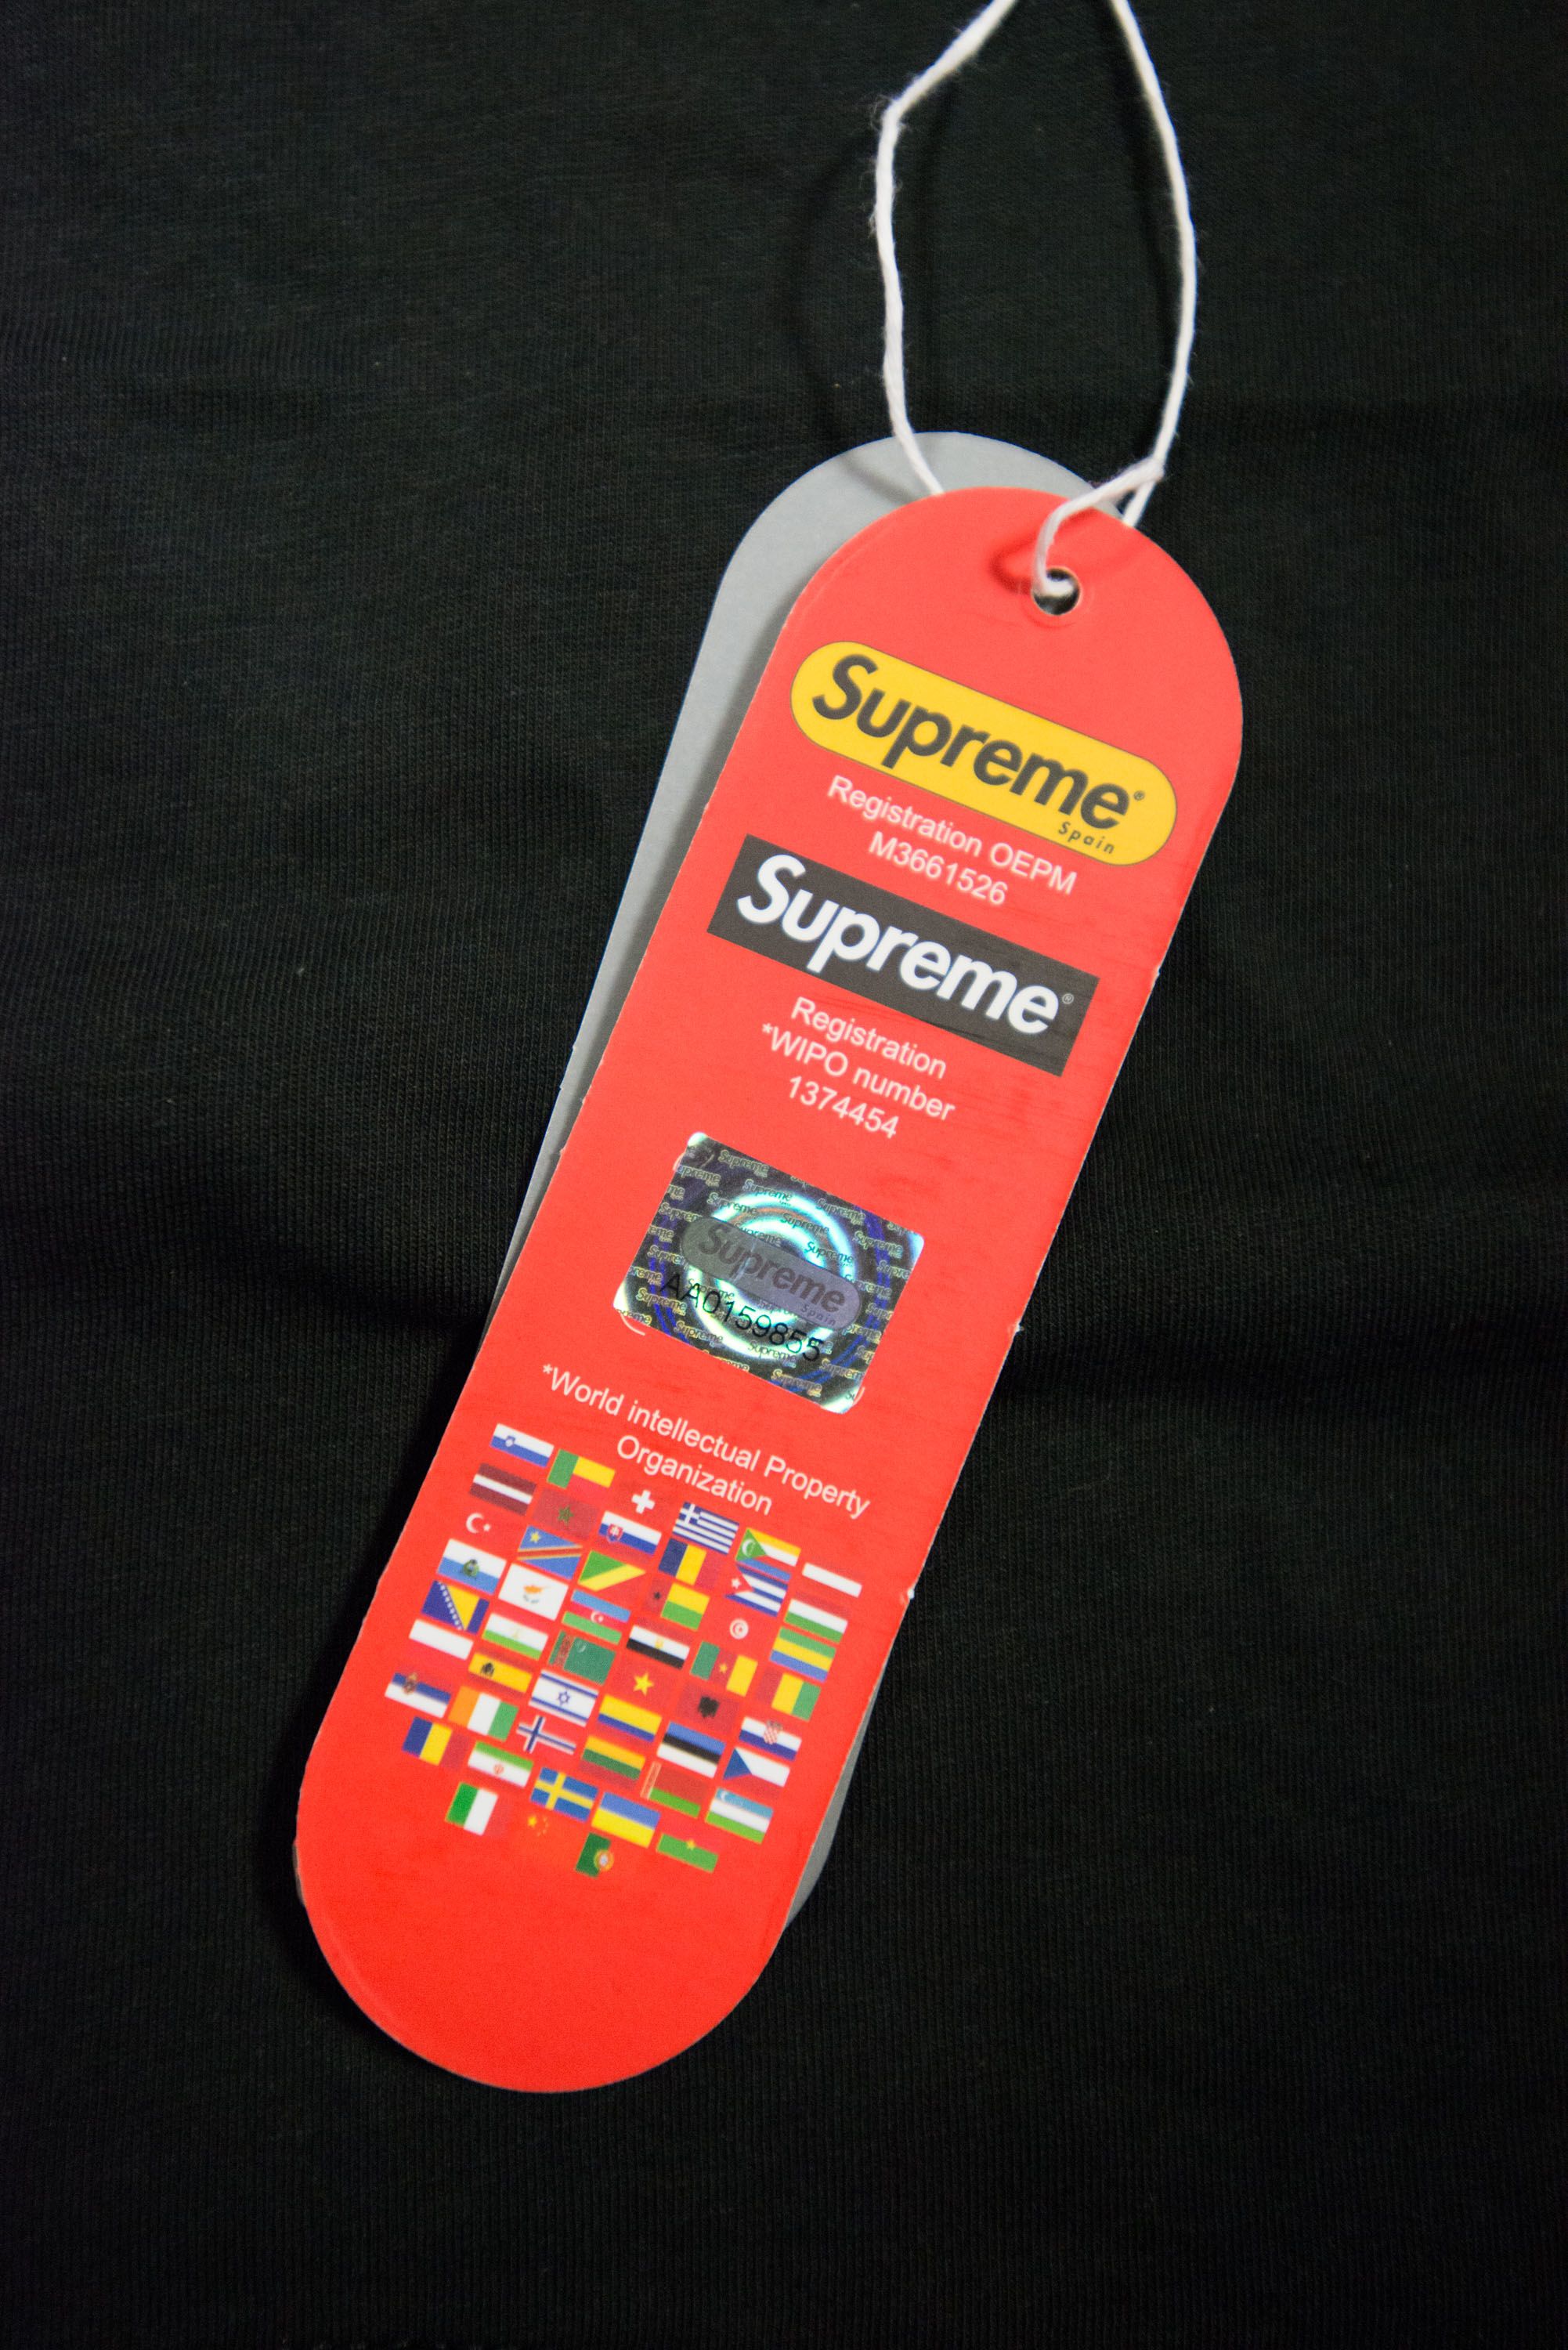 An Inside Look at Barcelona's Fake Supreme Store